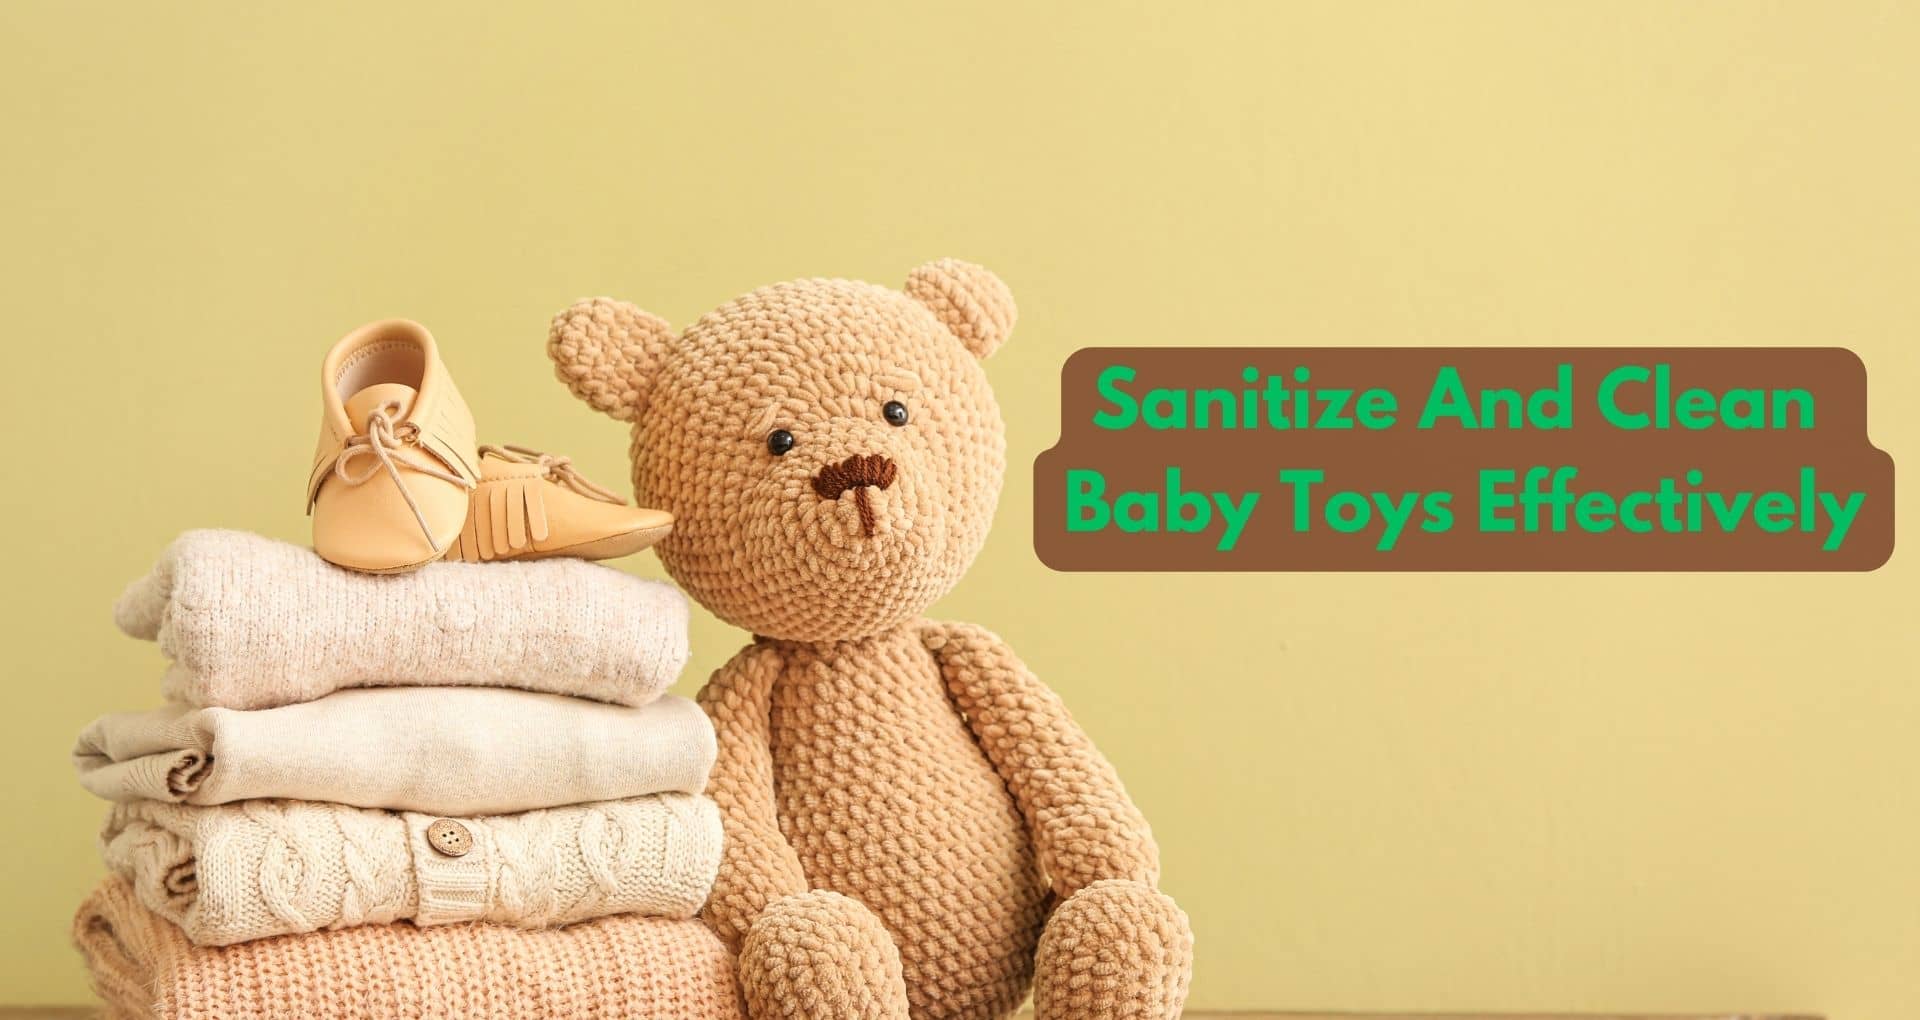 How Do I Sanitize And Clean Baby Toys Effectively?